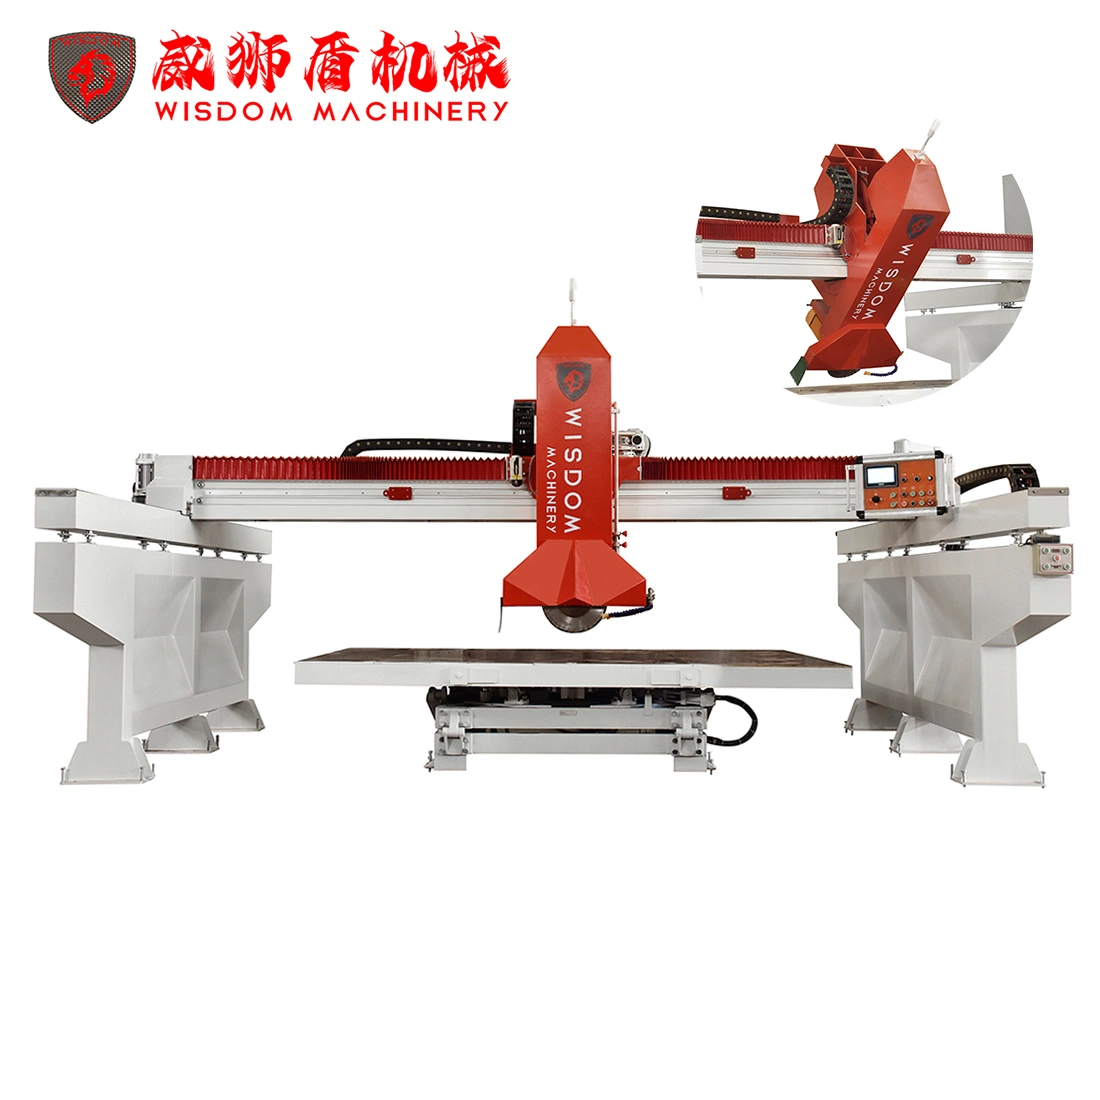 Low Price Auto PLC Stone Cutting Machine Bridge Type Infrared Laser Marble Table Saw with Bevel Cut and Chamfering Miter Cutter Machinery Wsd625m